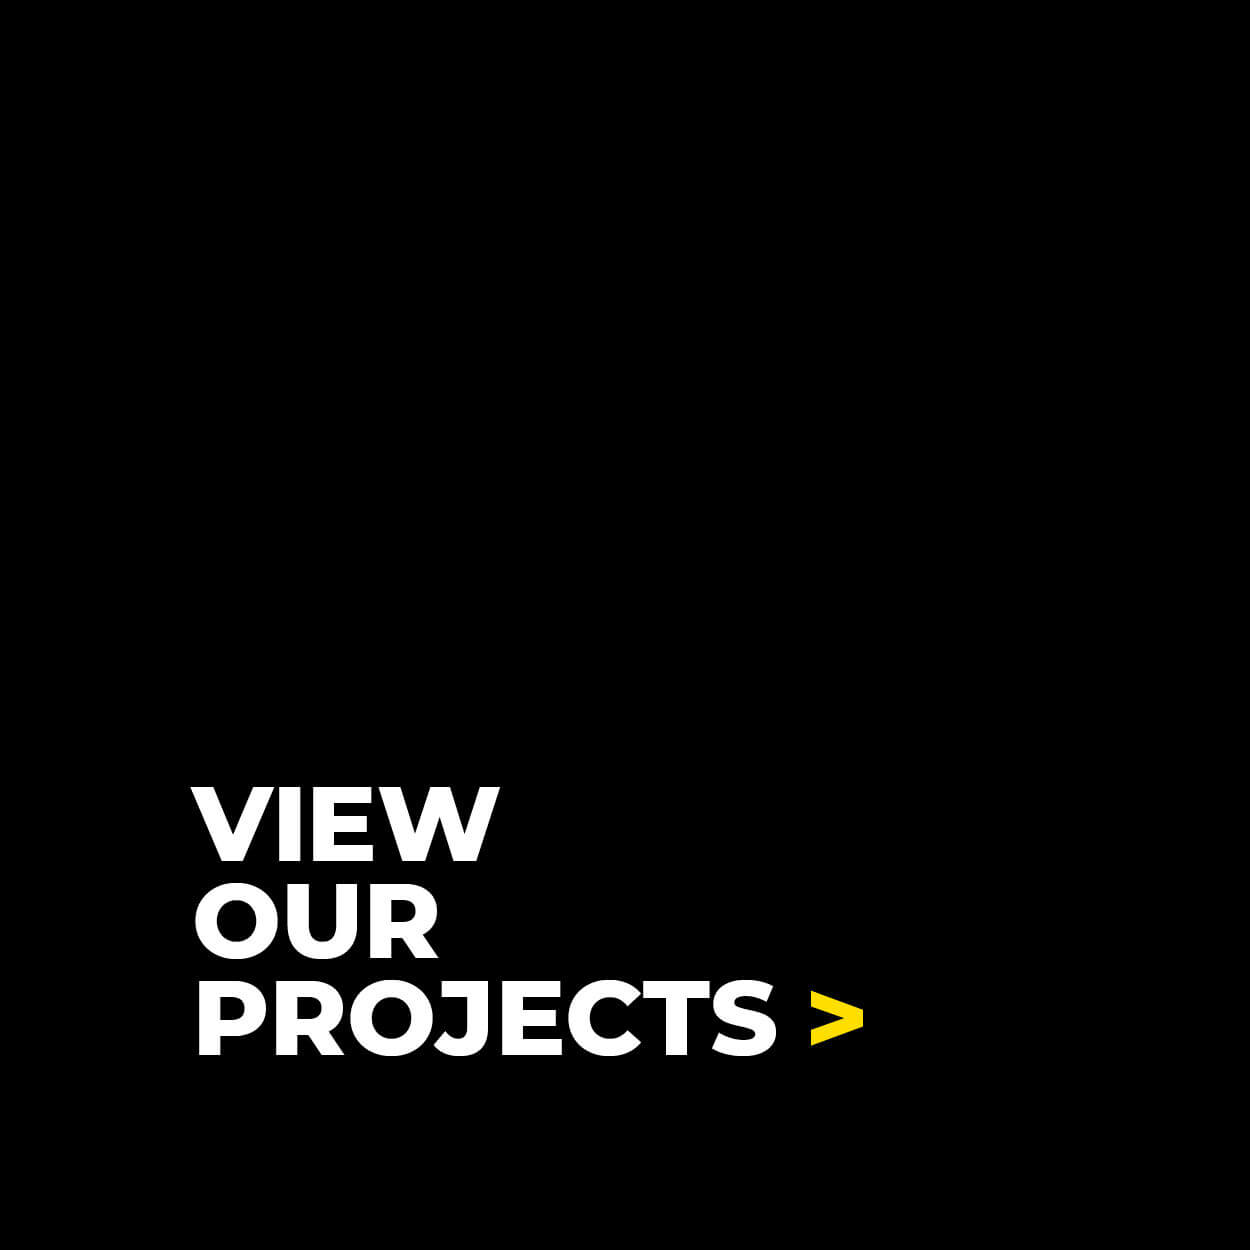 This image features a black background with white text in the center that reads "view our projects in Newcastle" followed by a right-pointing arrow symbol in yellow. The text and arrow are bold and centered